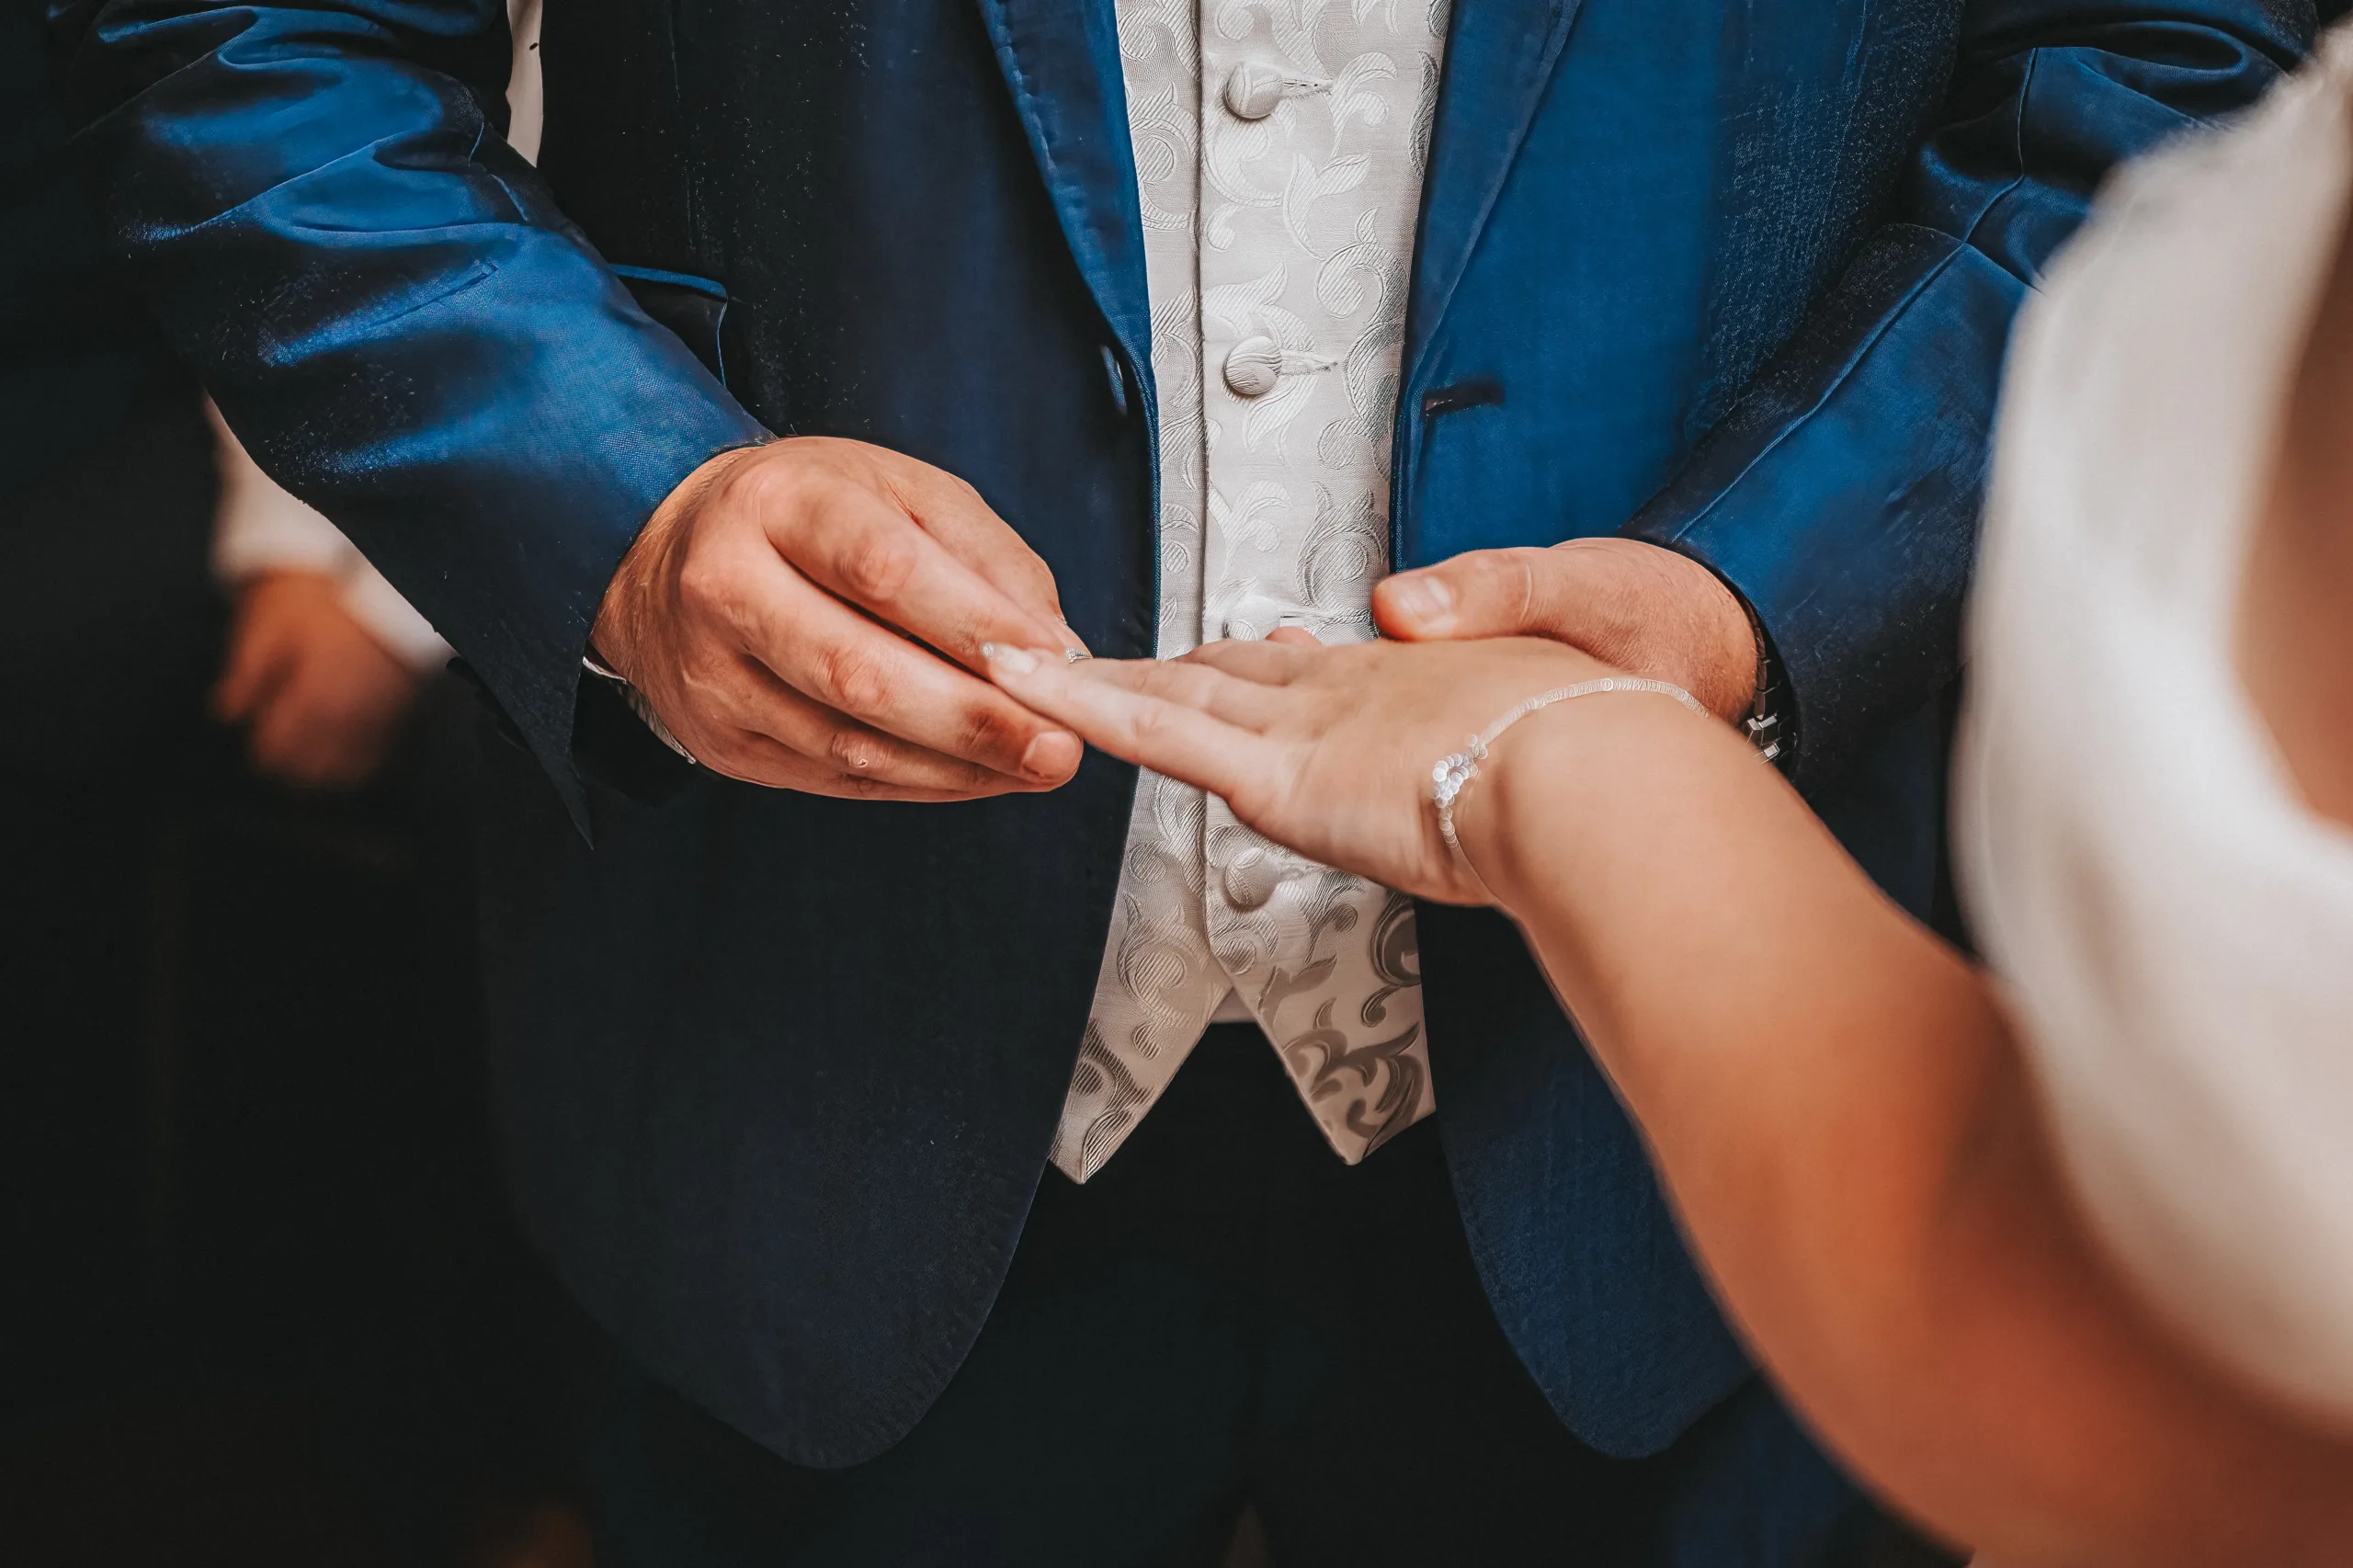 A Yorkshire bride is slipping the wedding ring onto her husband's finger as the photographer captures the moment.